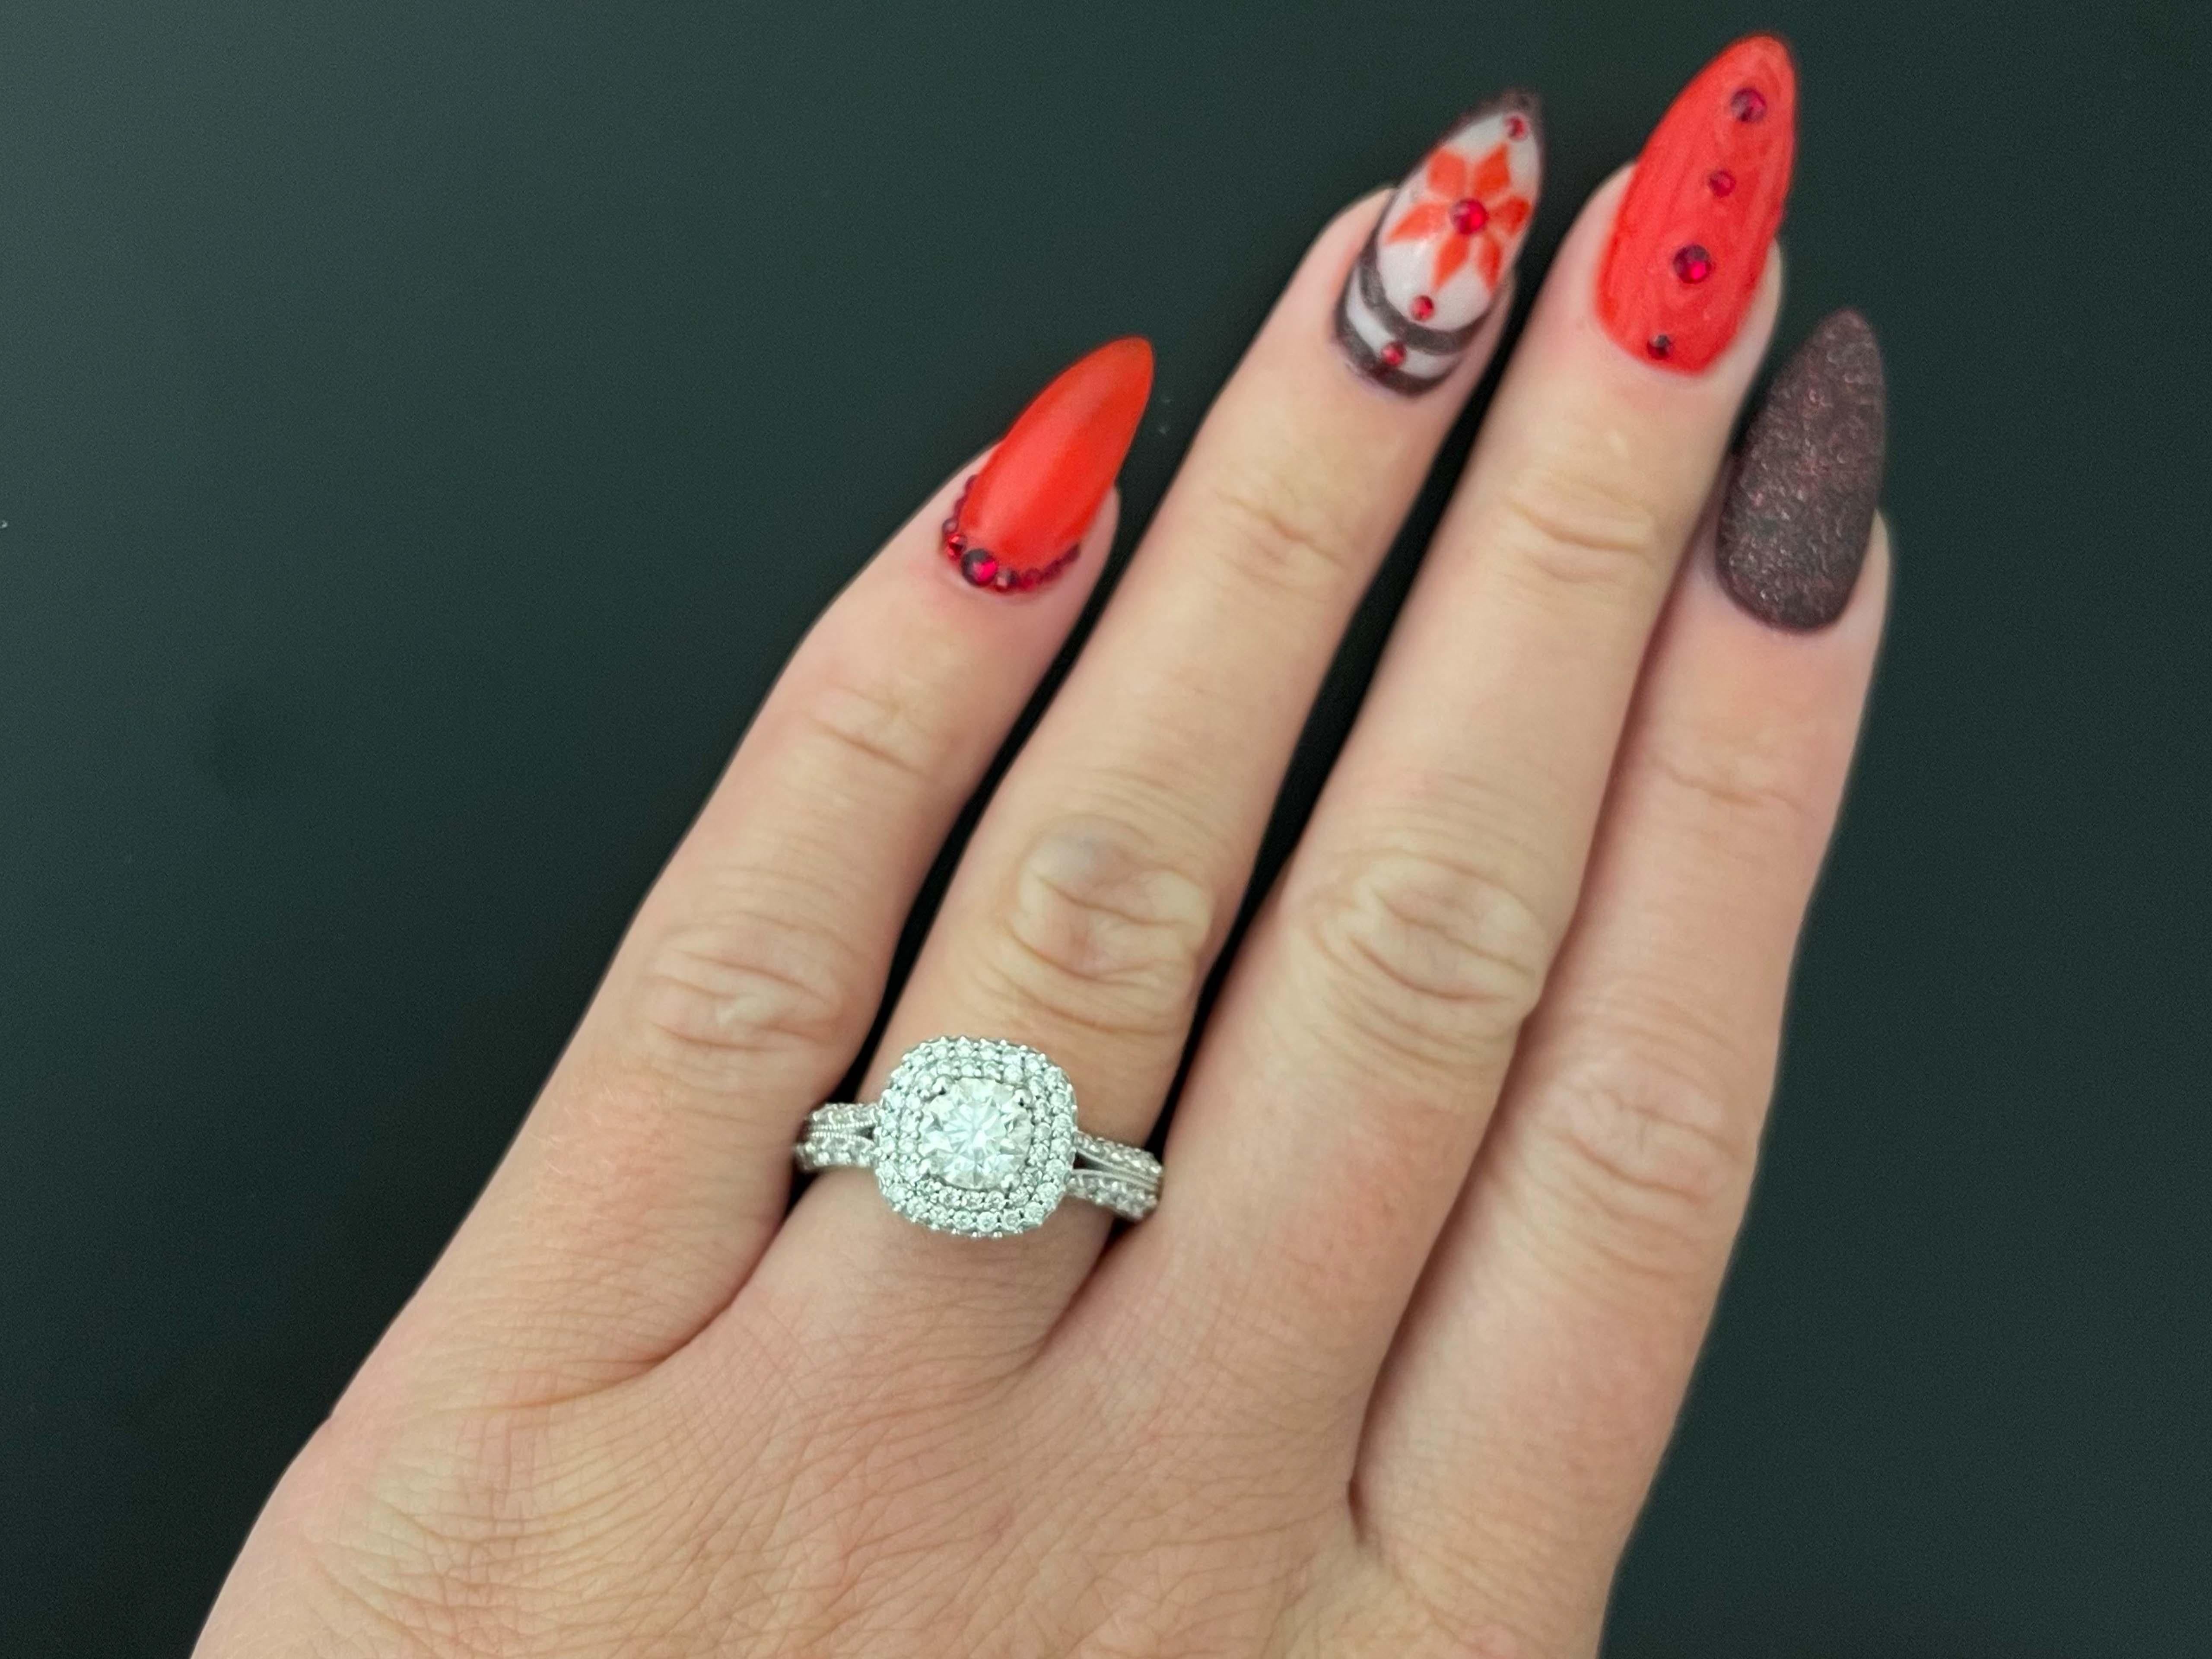 This stunning ring has a round brilliant cut 0.84 carat diamond set in 4 prongs, surrounded by a double diamond halo. The ring has a split shank set with diamonds. The center diamond is H-I in color and SI2 in clarity. The additional 132 diamonds